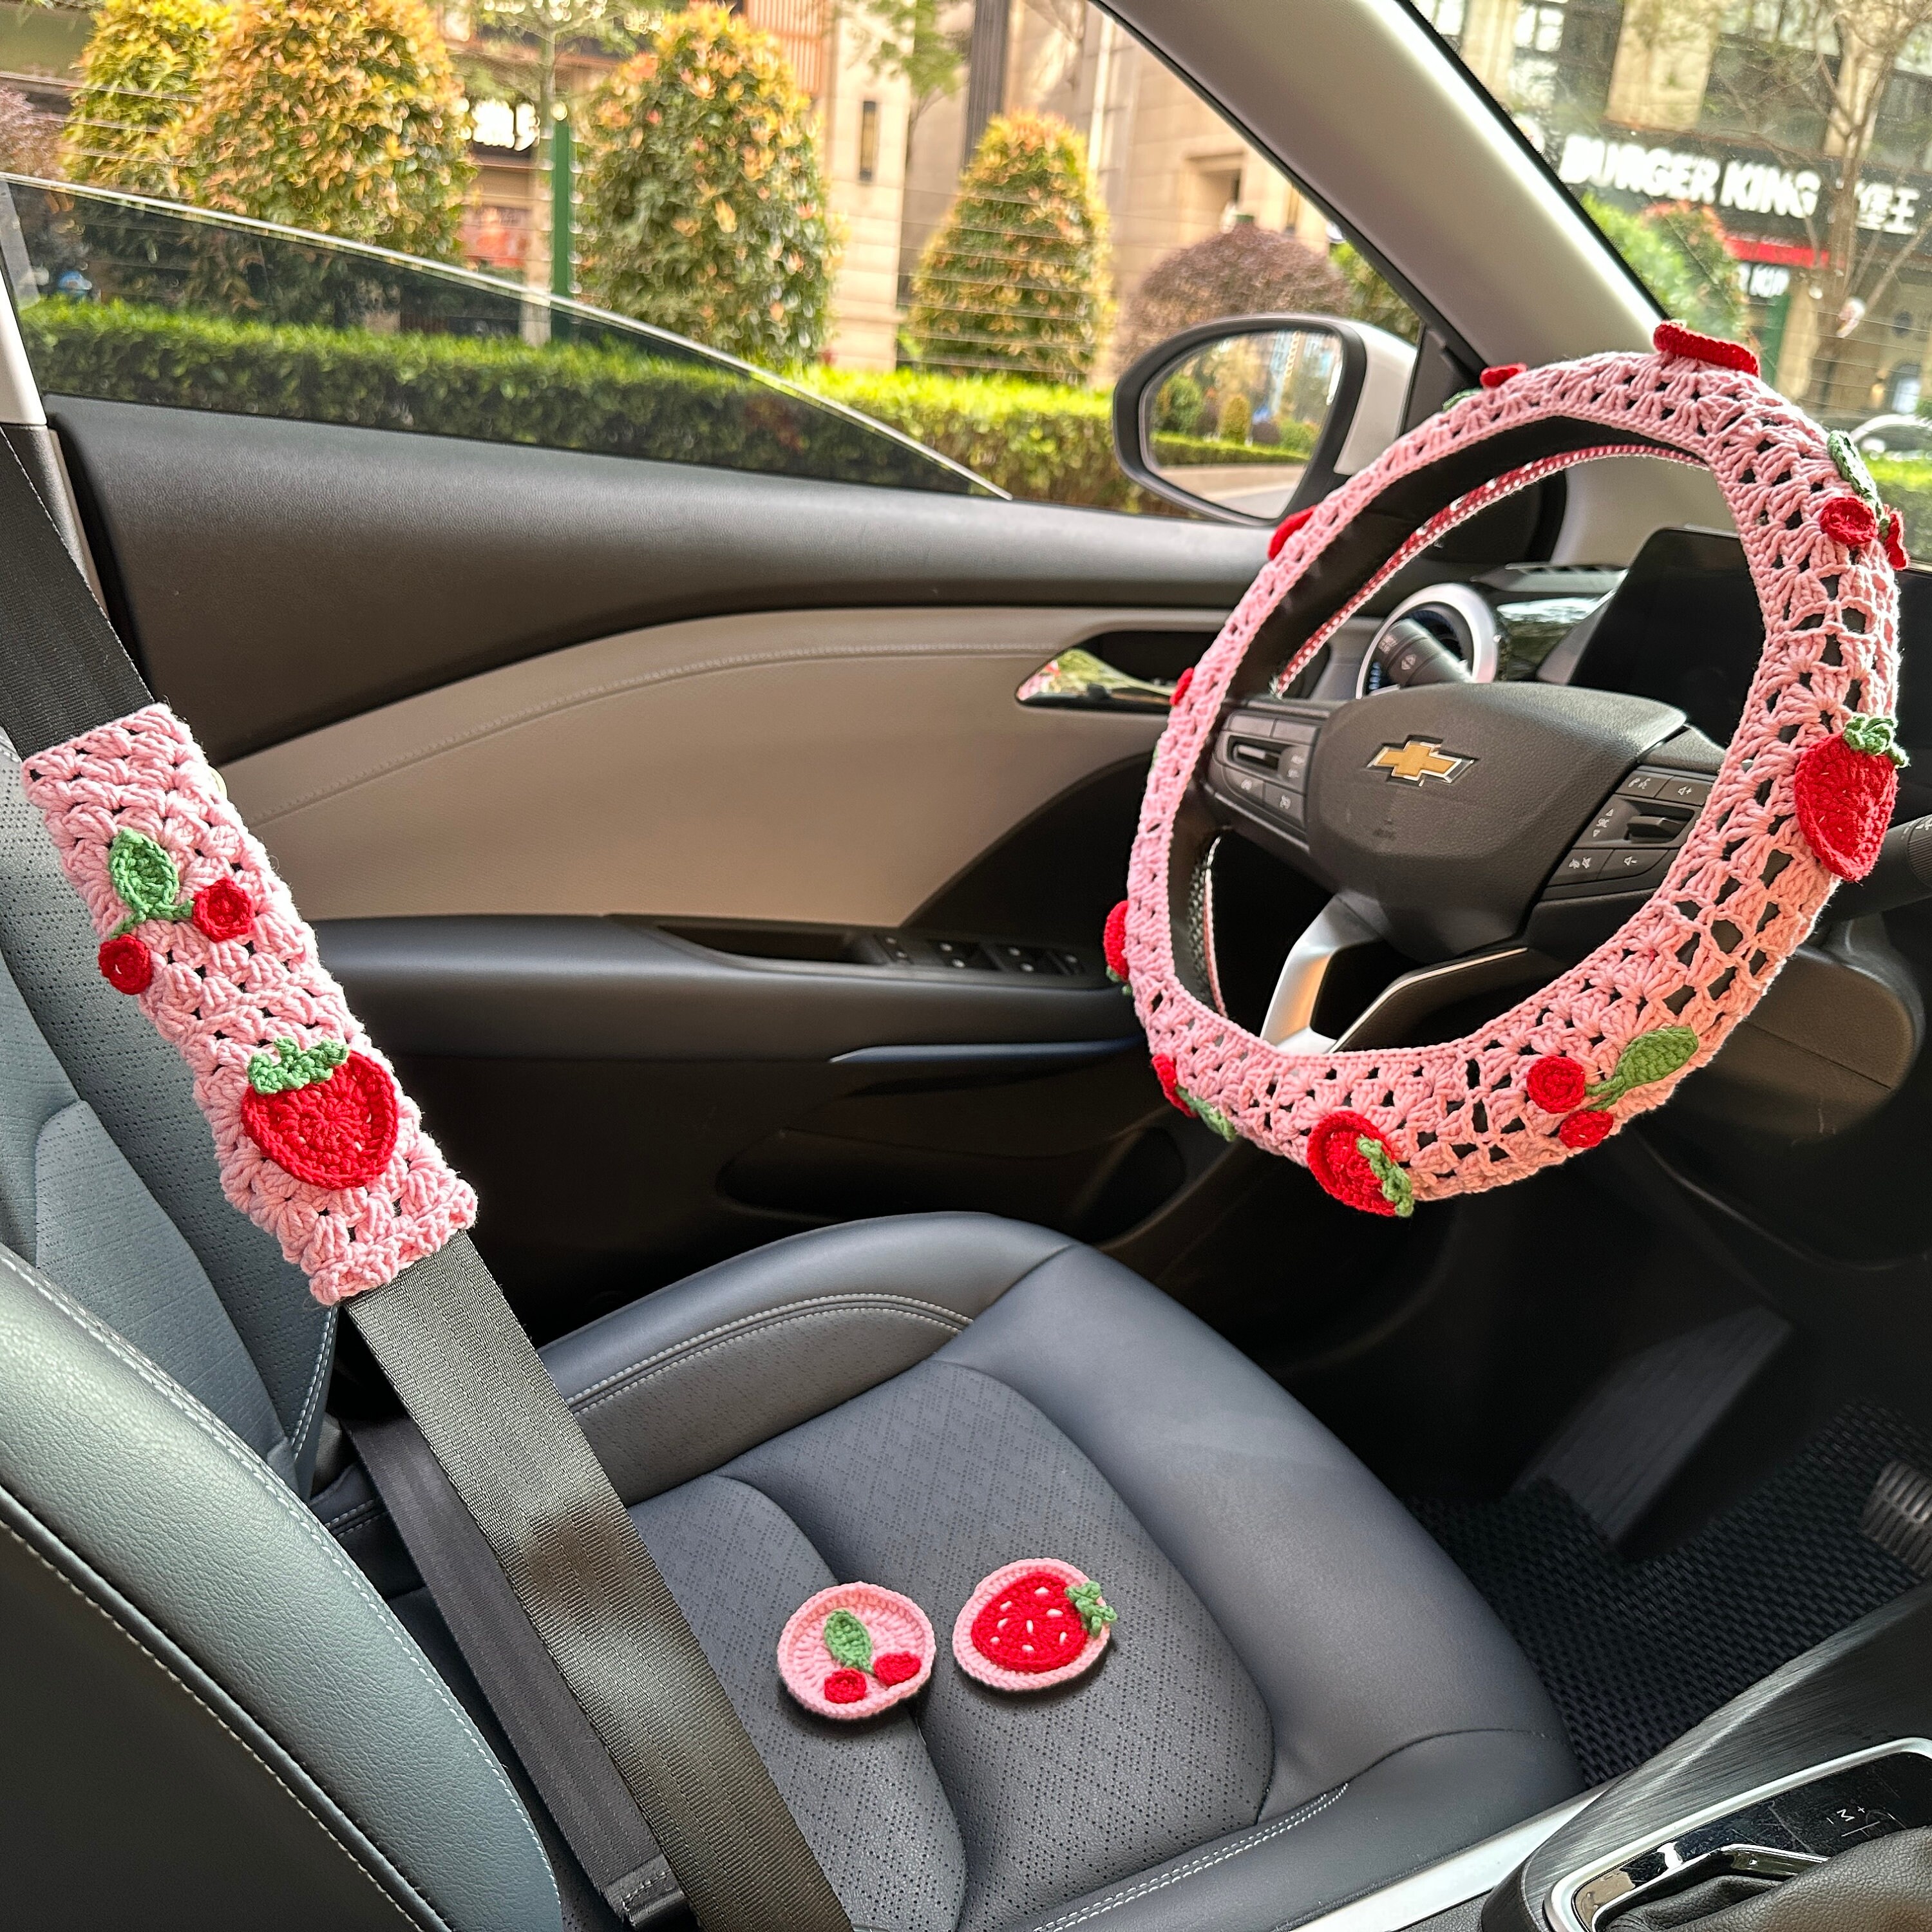  ZPINXIGN Strawberry Cow Seat Cover with Steering Wheel